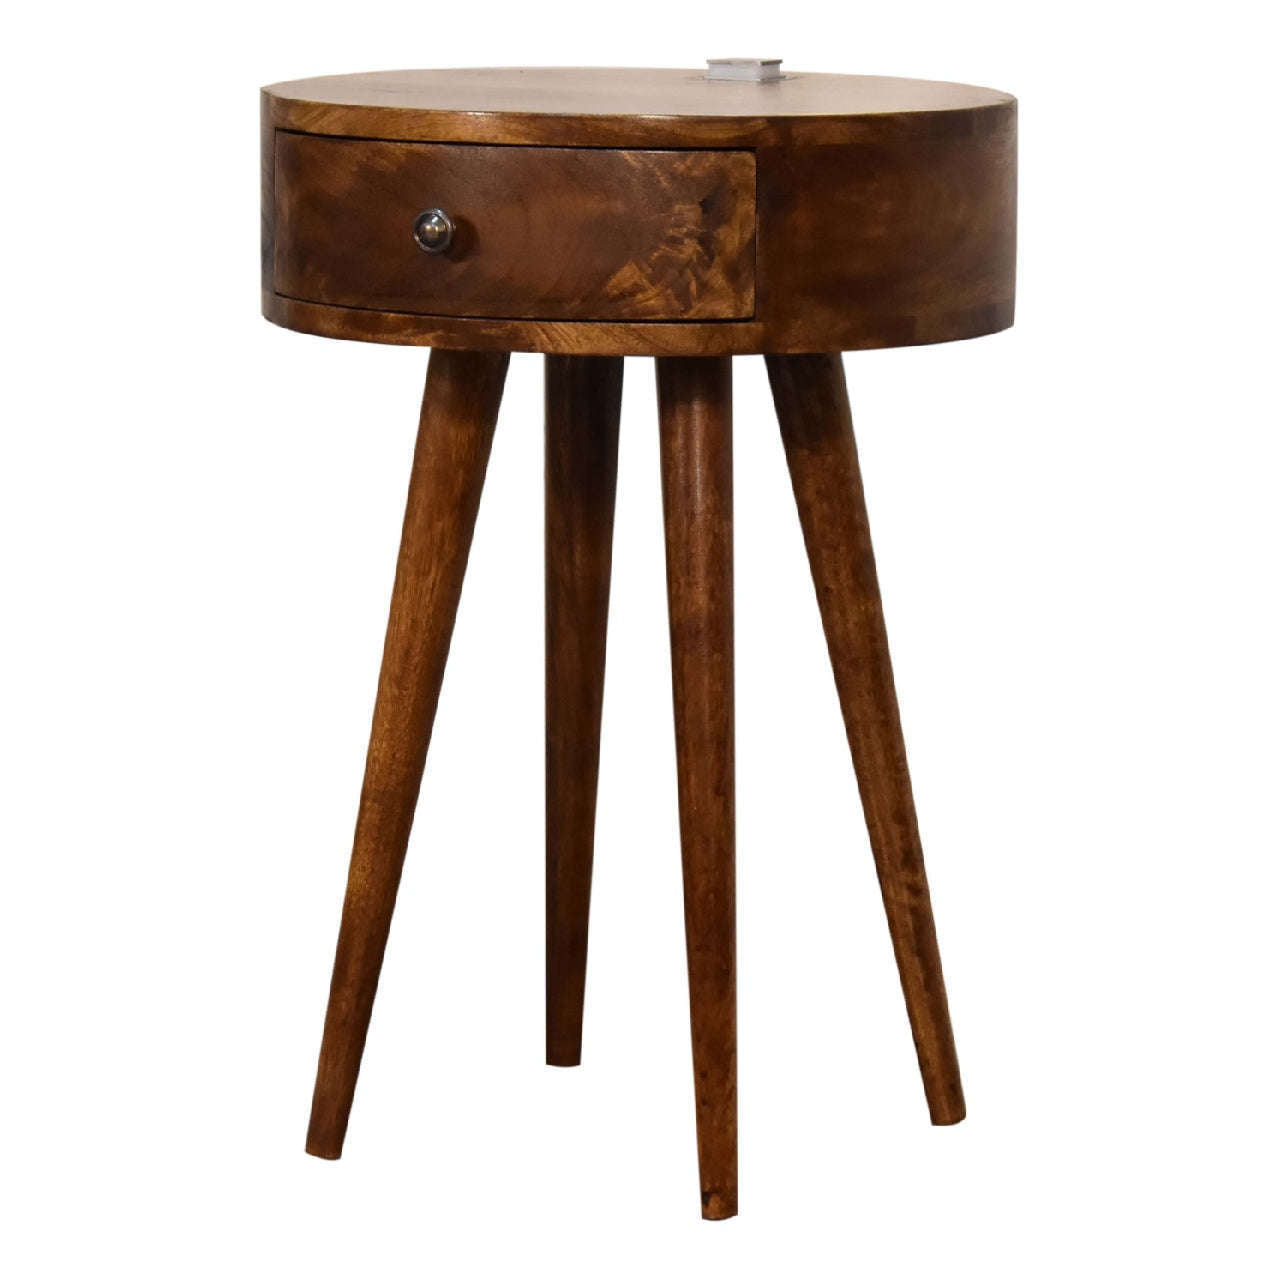 Ashpinoke:Single Chestnut Rounded Bedside Table with Reading Light-Bedsides-Artisan